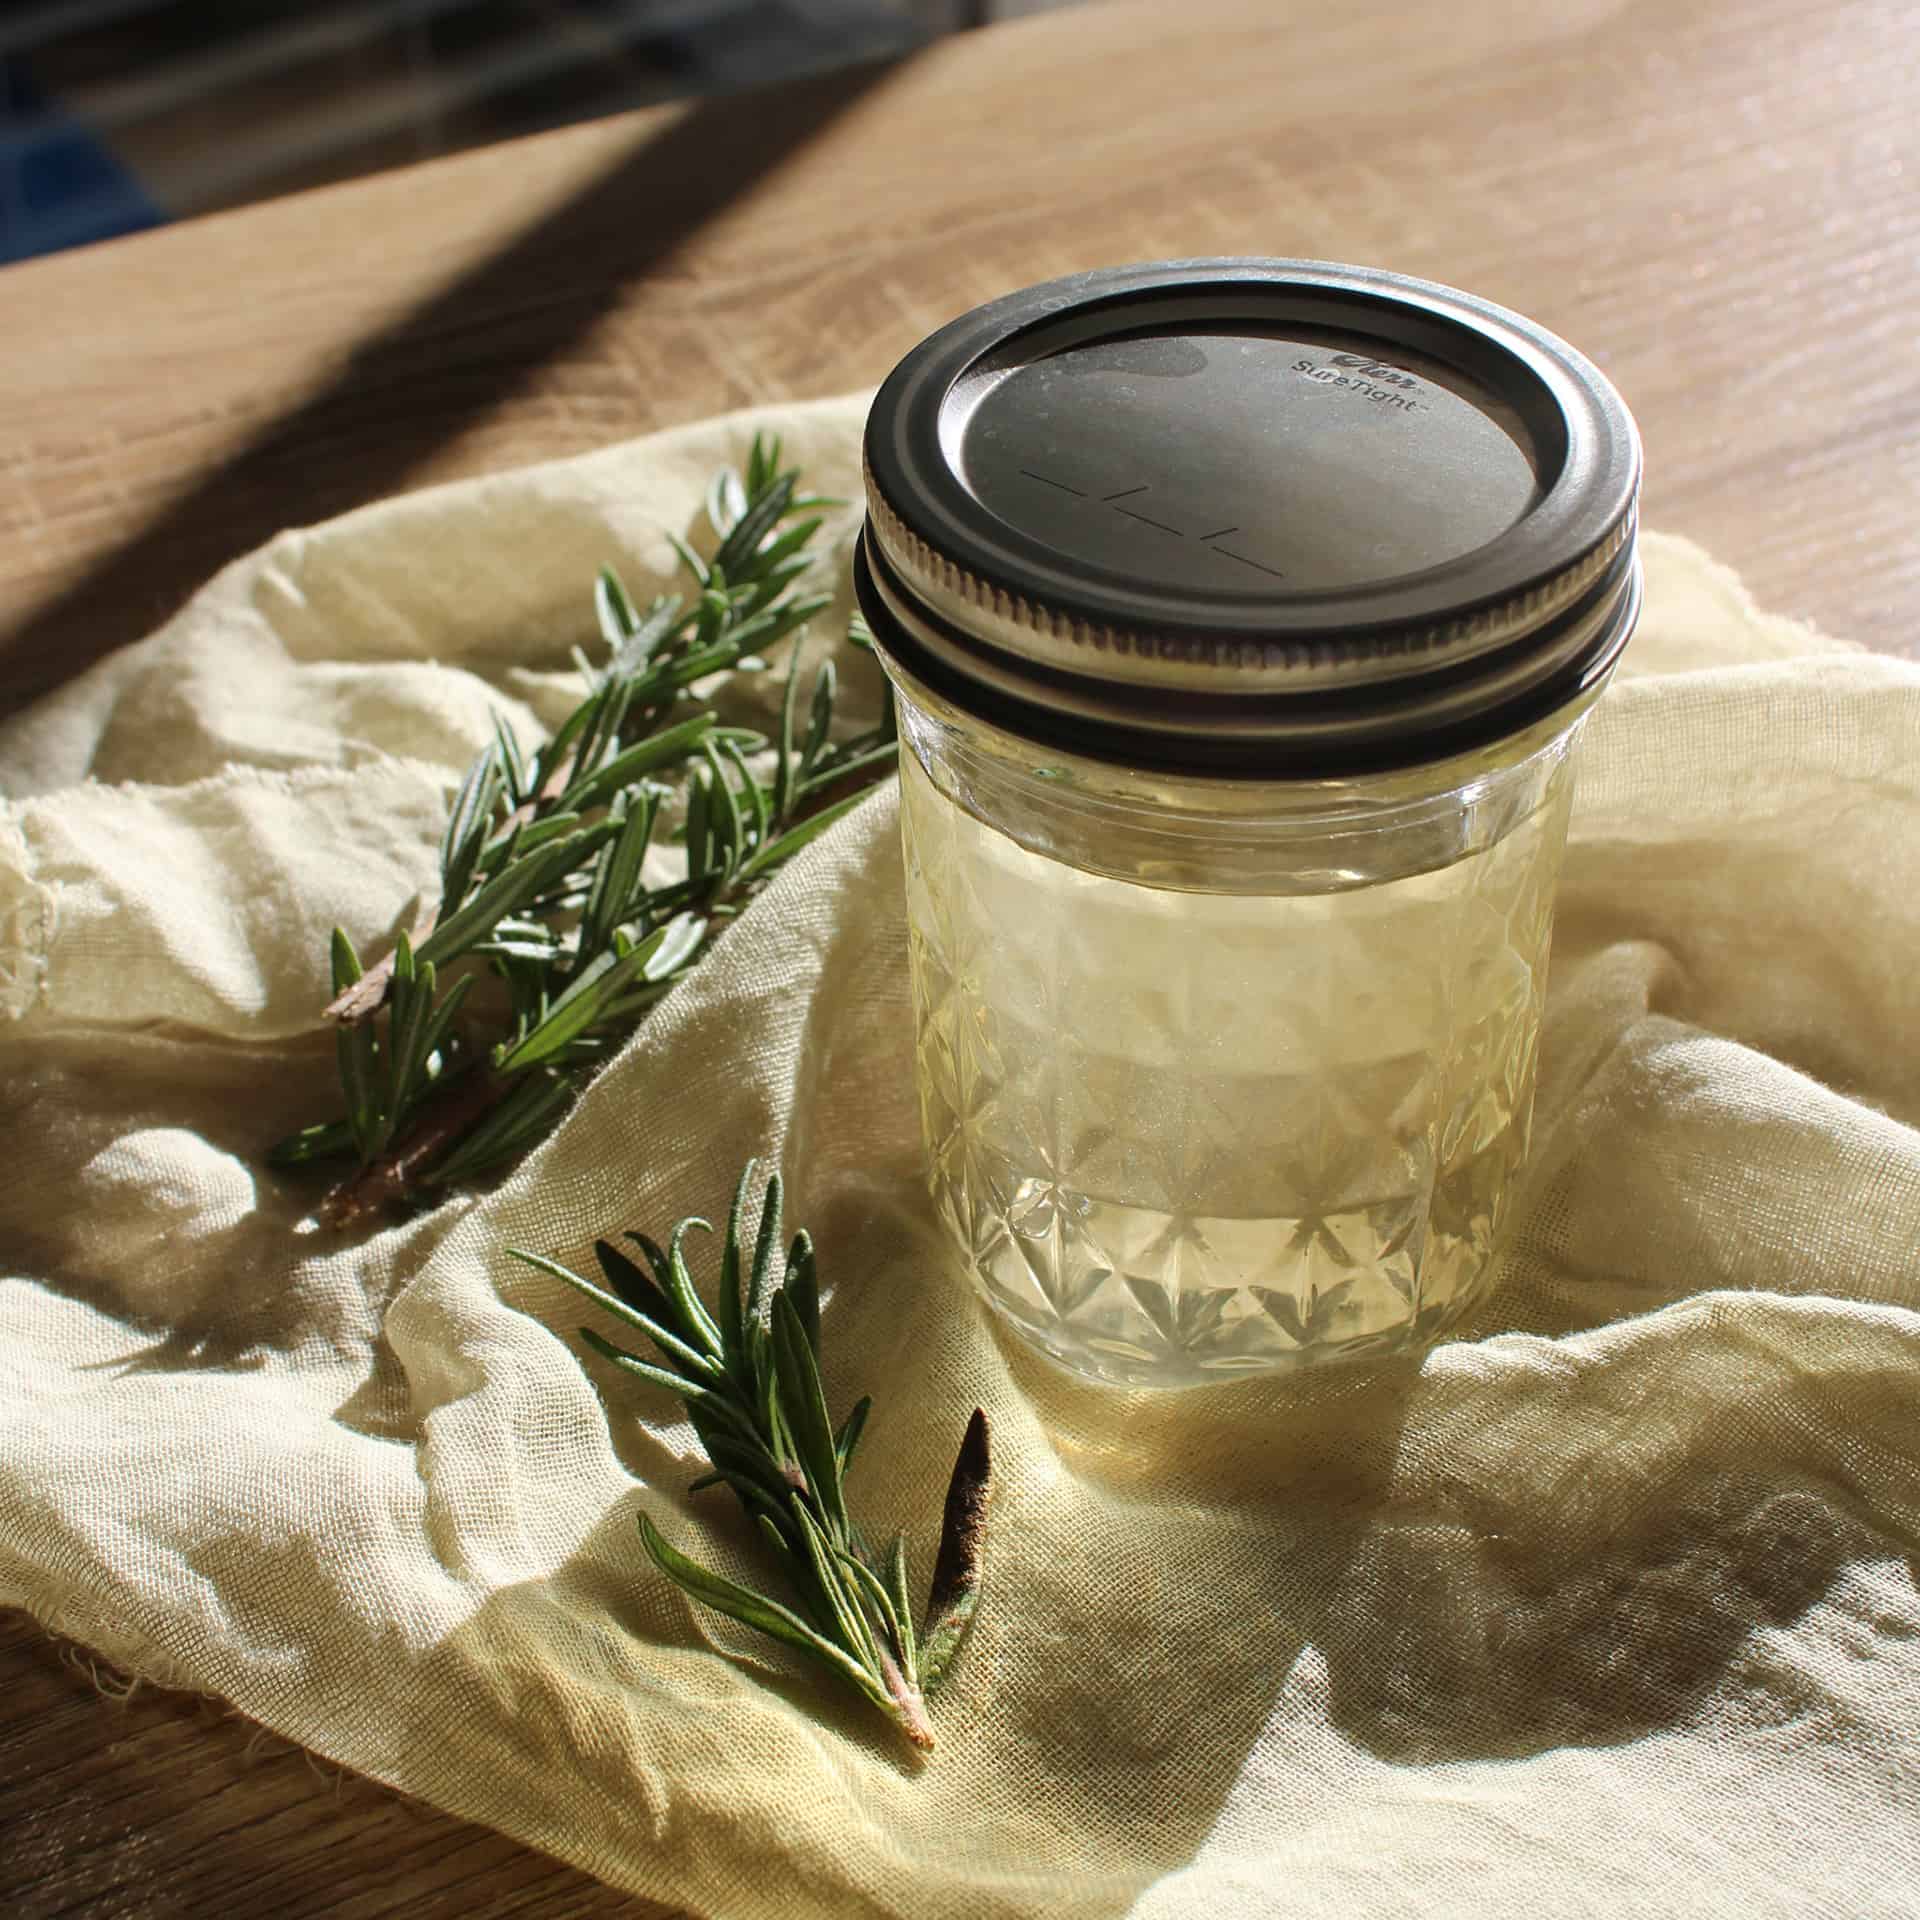 Rosemary simple syrup in a glass jar with an aluminum lid